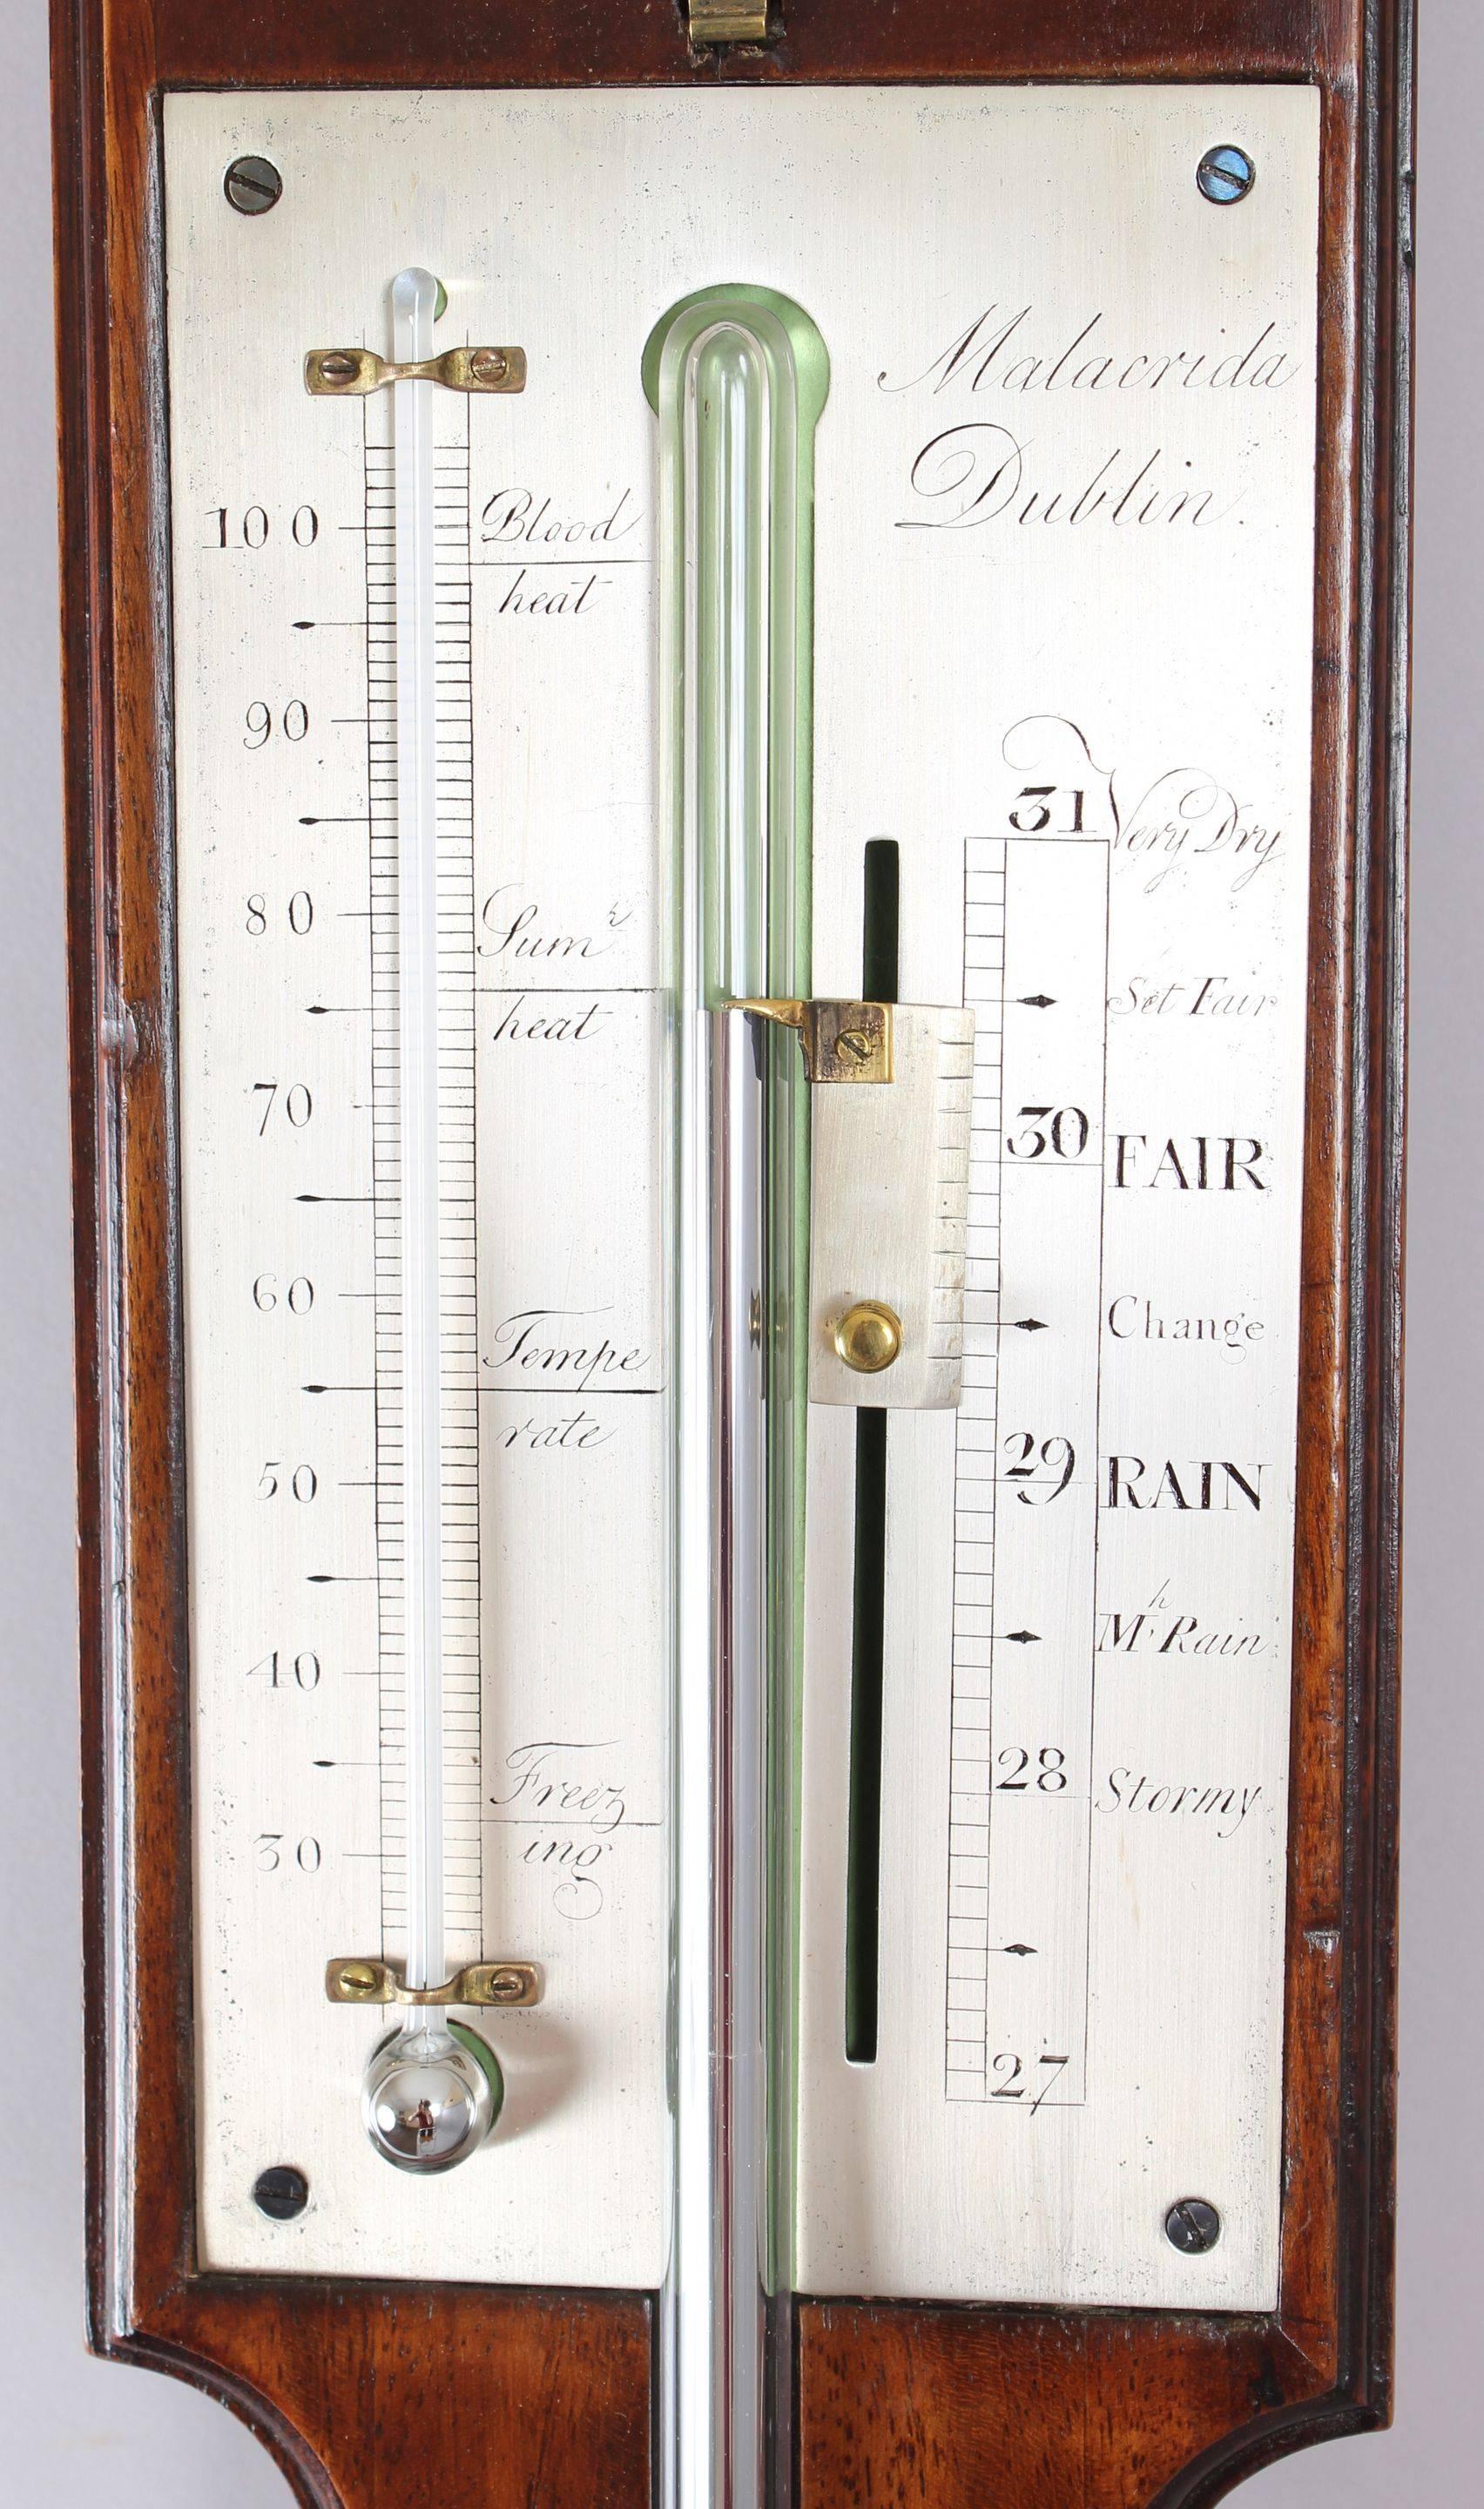 Early 19th century mahogany stick barometer by Malacrida of Dublin*; the finely engraved silvered register panel with vernier scale with mercury thermometer and hygrometer; on a mahogany case with moulded edge surmounted by a broken arch pediment.